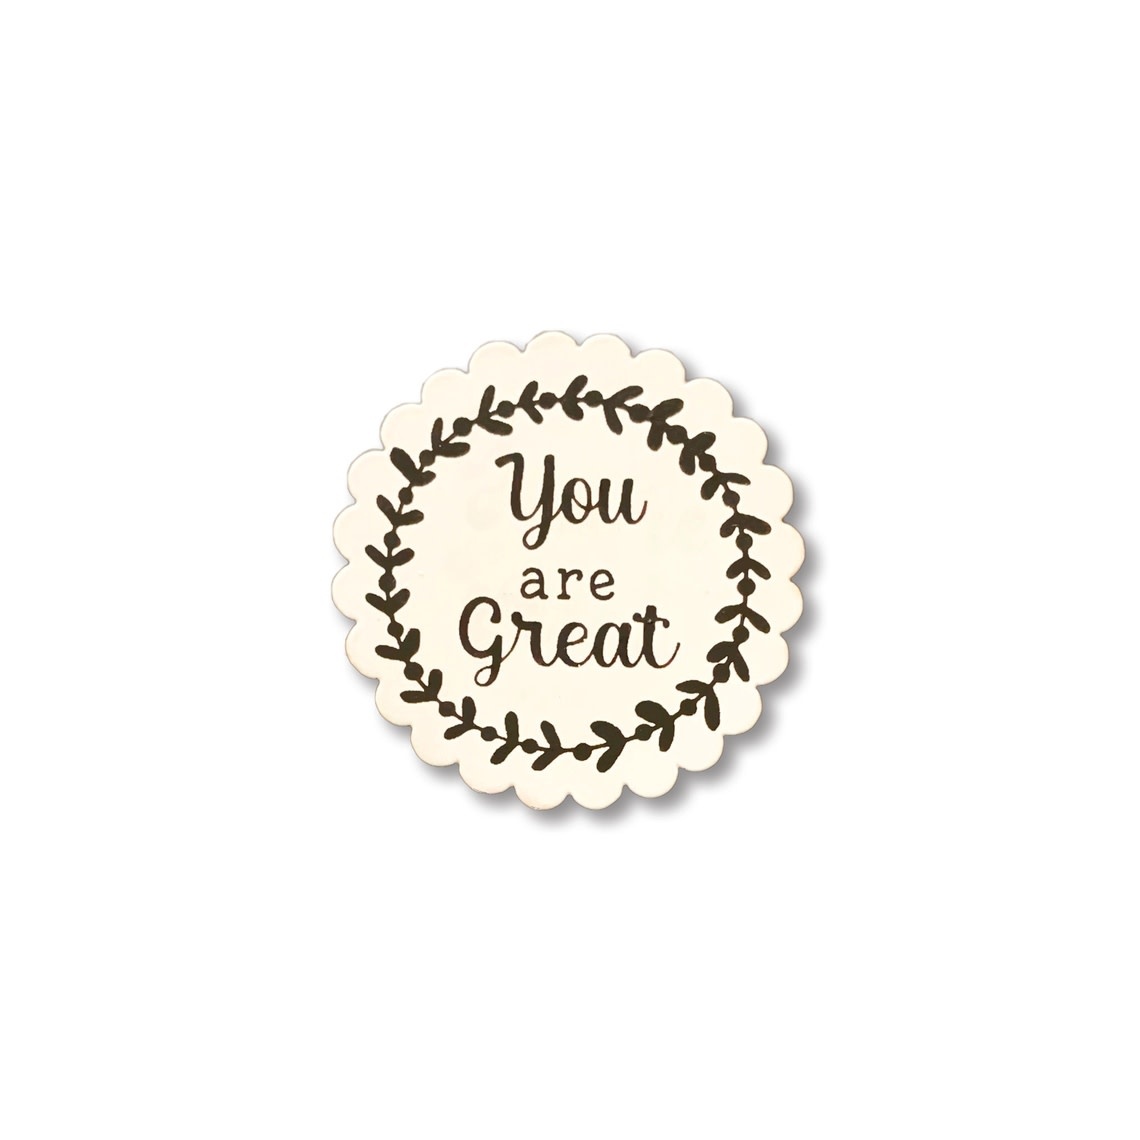 Roeda Studio "You Are Great" Single Magnet